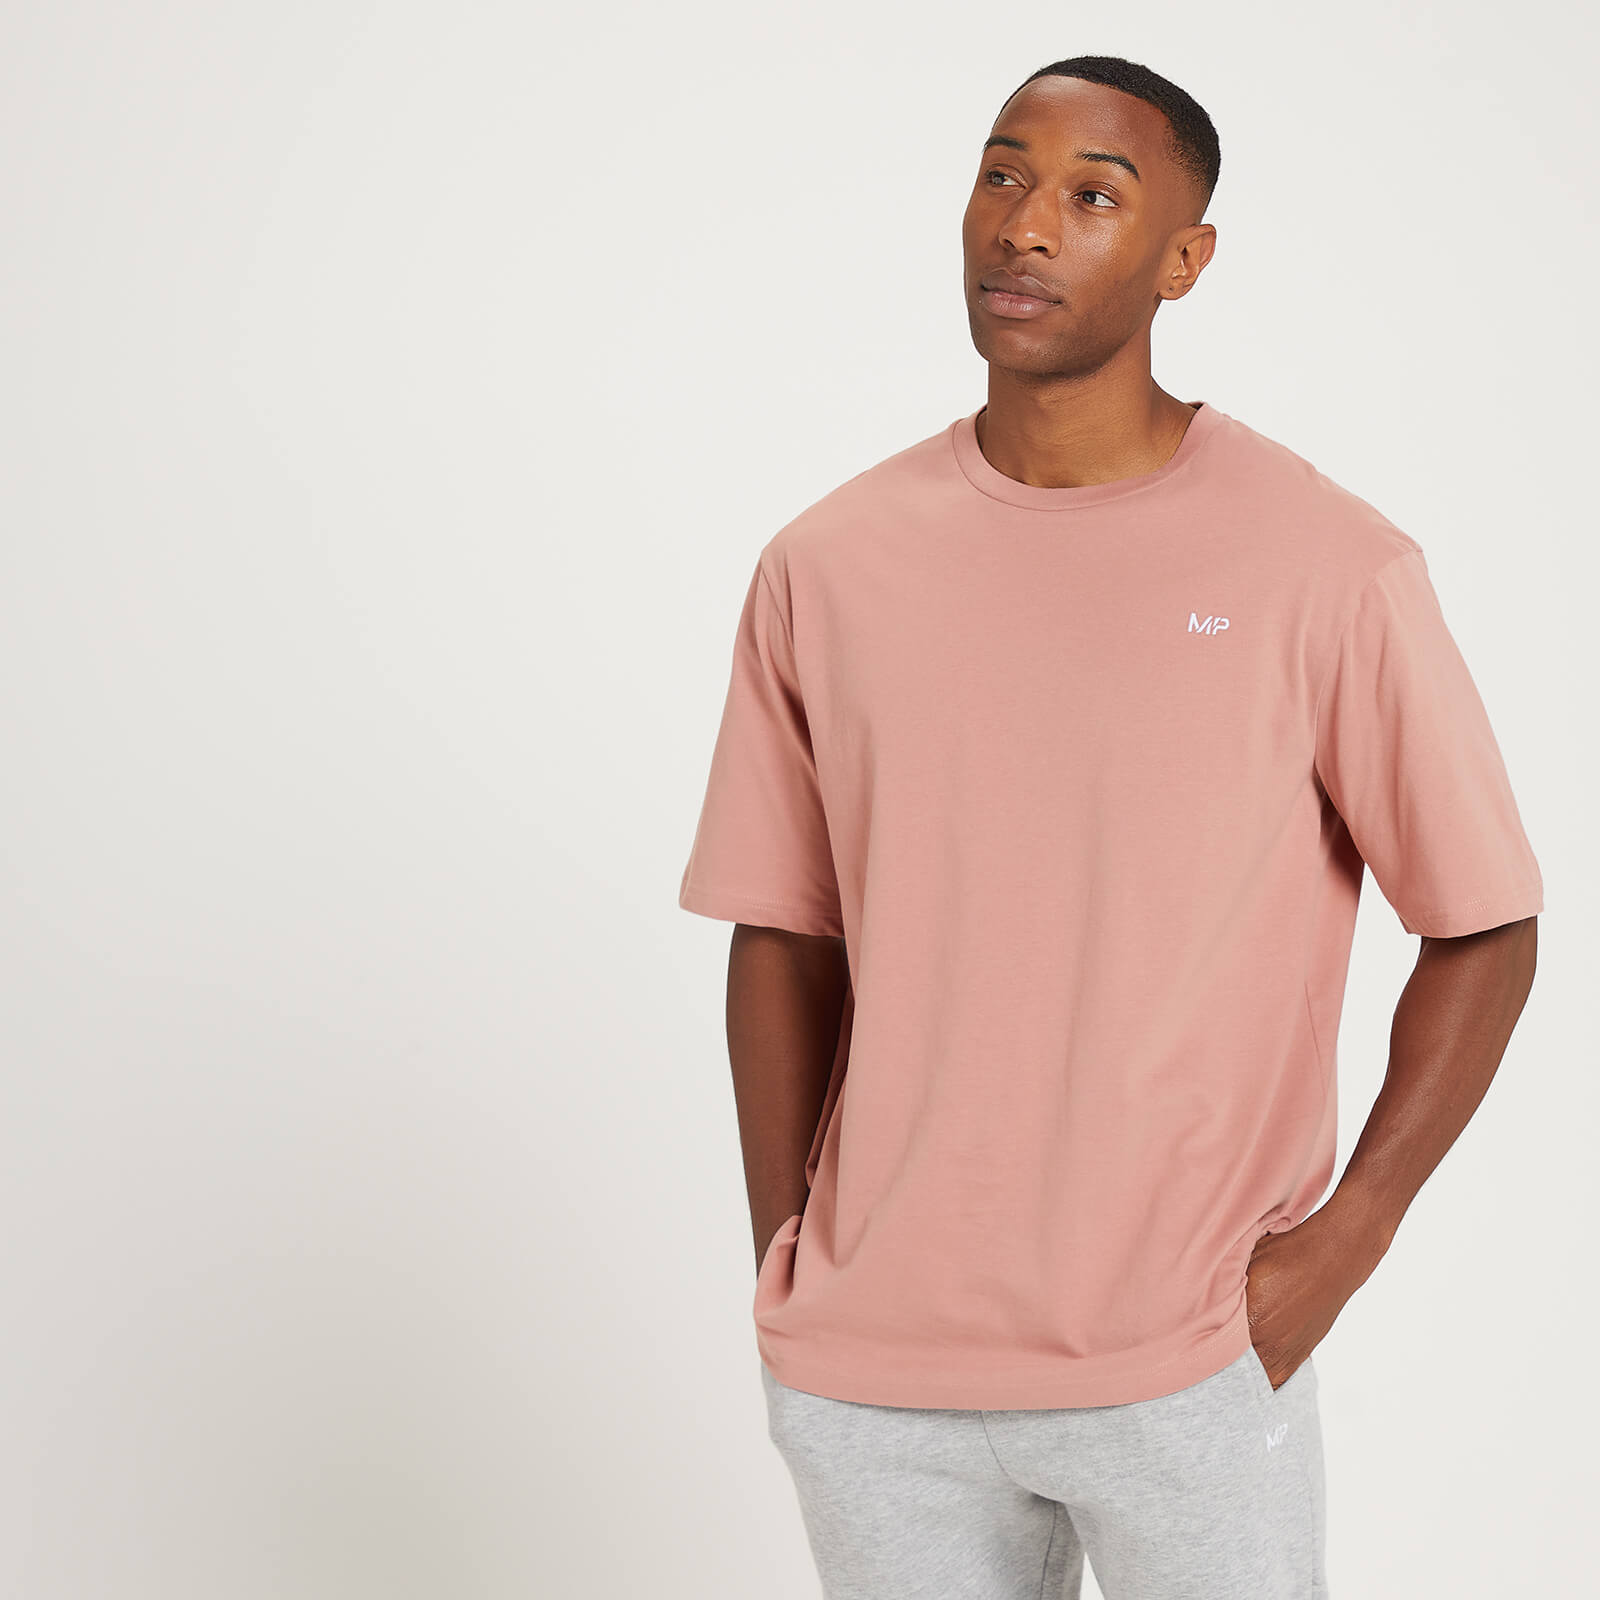 MP Men's Oversized T-Shirt - Washed Pink - XL